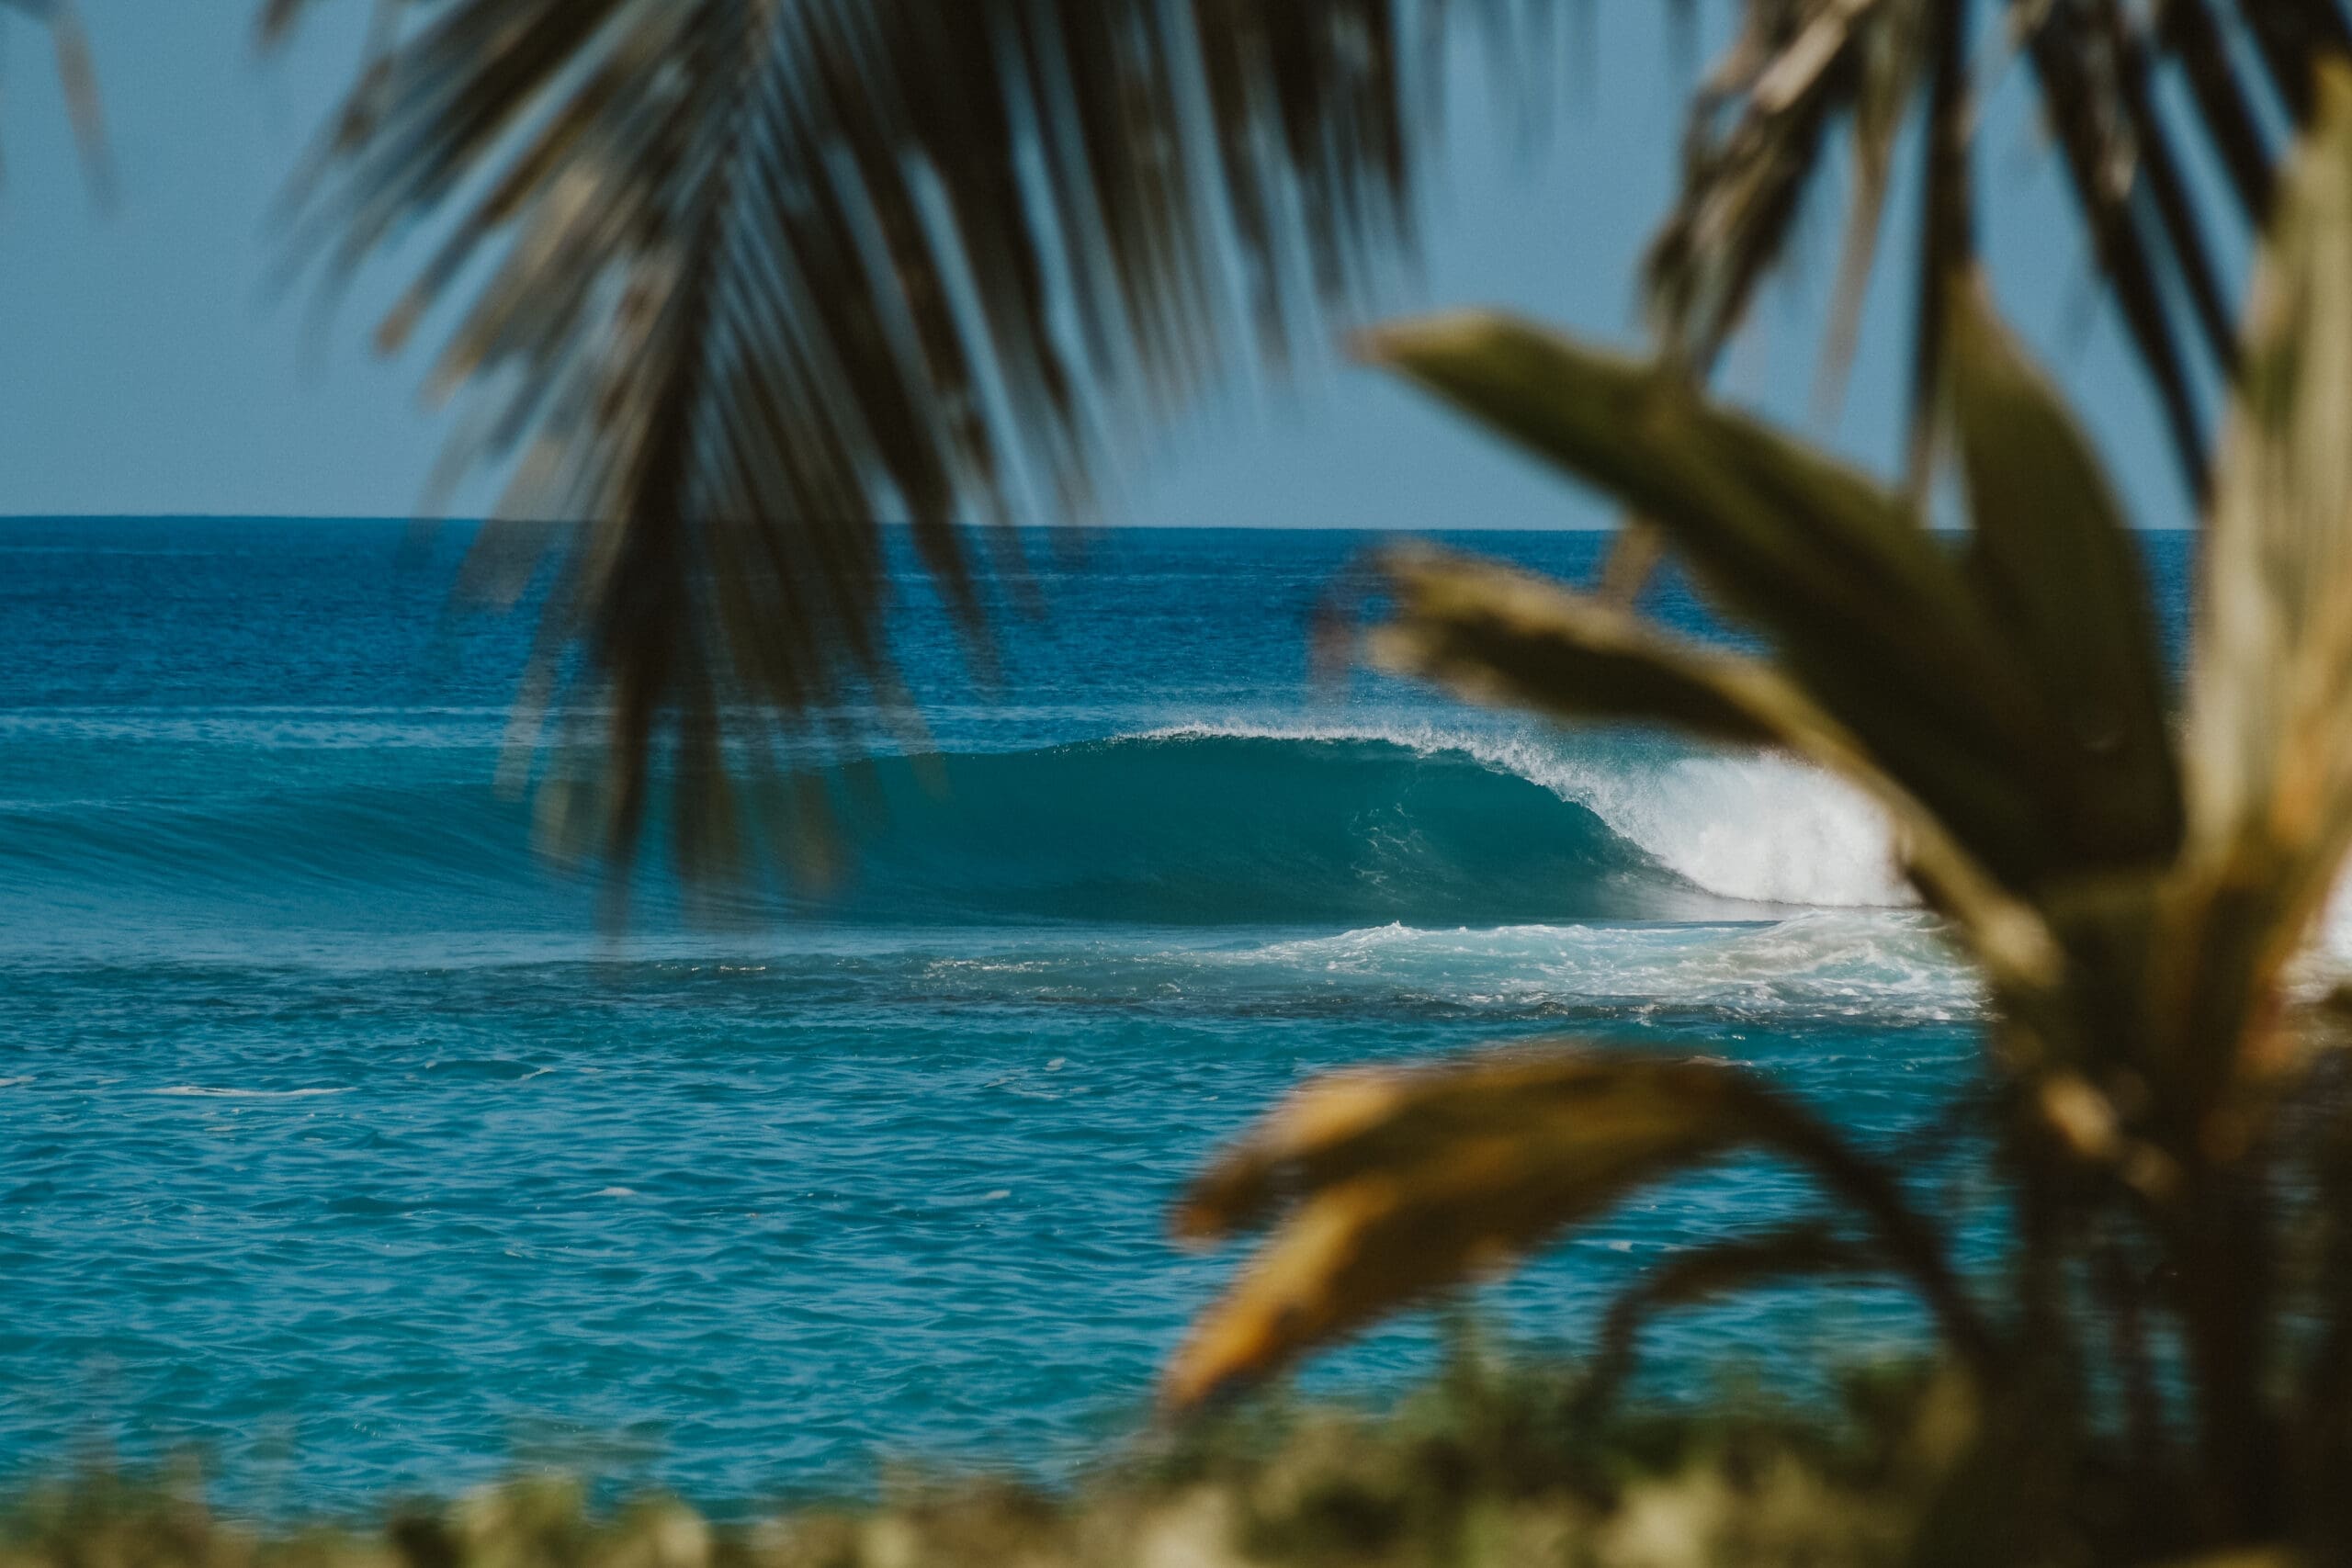 Application Closed: Villa Onu Mentawai is looking for a new Surf Guide Manager